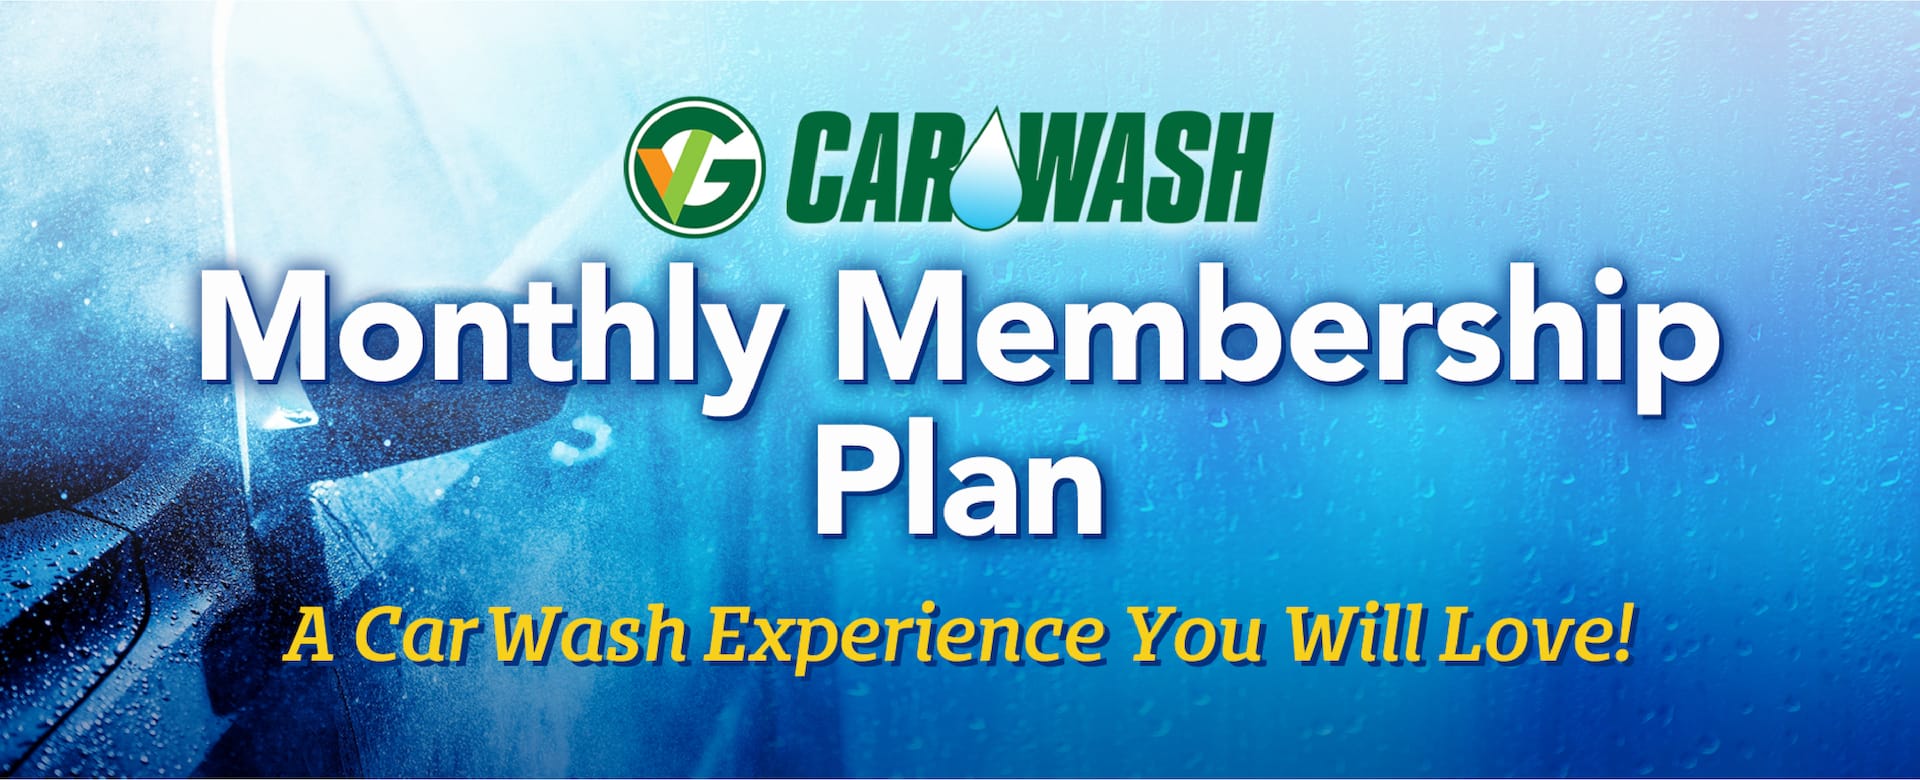 Green Valley Grocery Car Wash Monthly Membership Plan - A Car Wash Experience You Will Love!